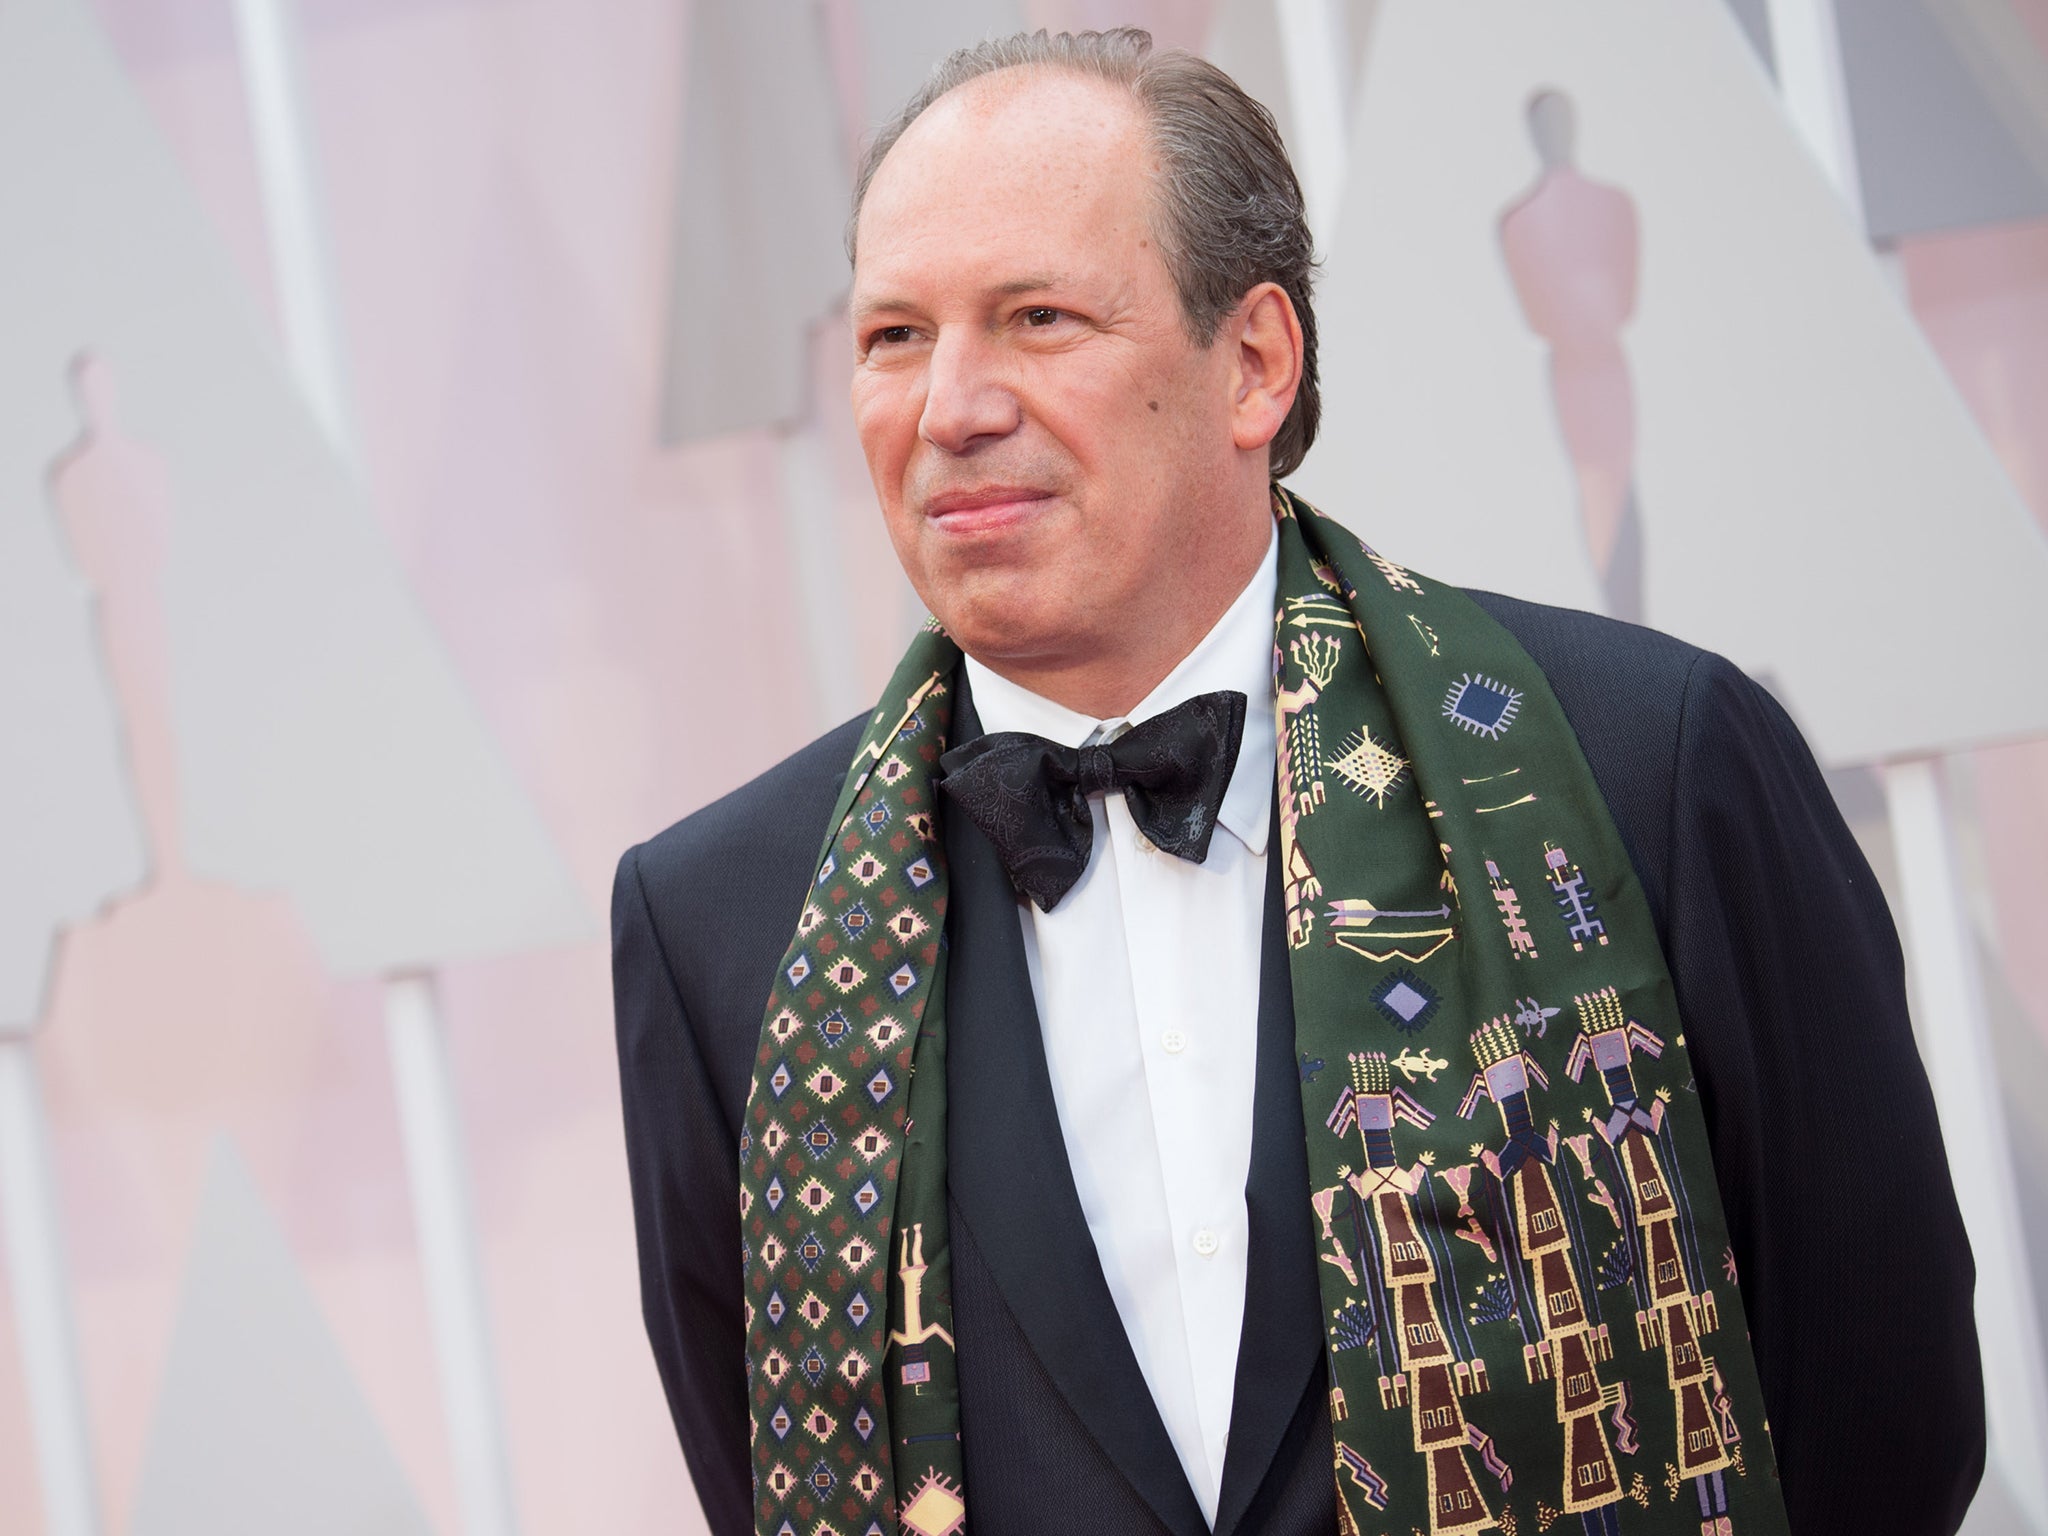 Hans Zimmer has written the scores to more than 150 box office hits